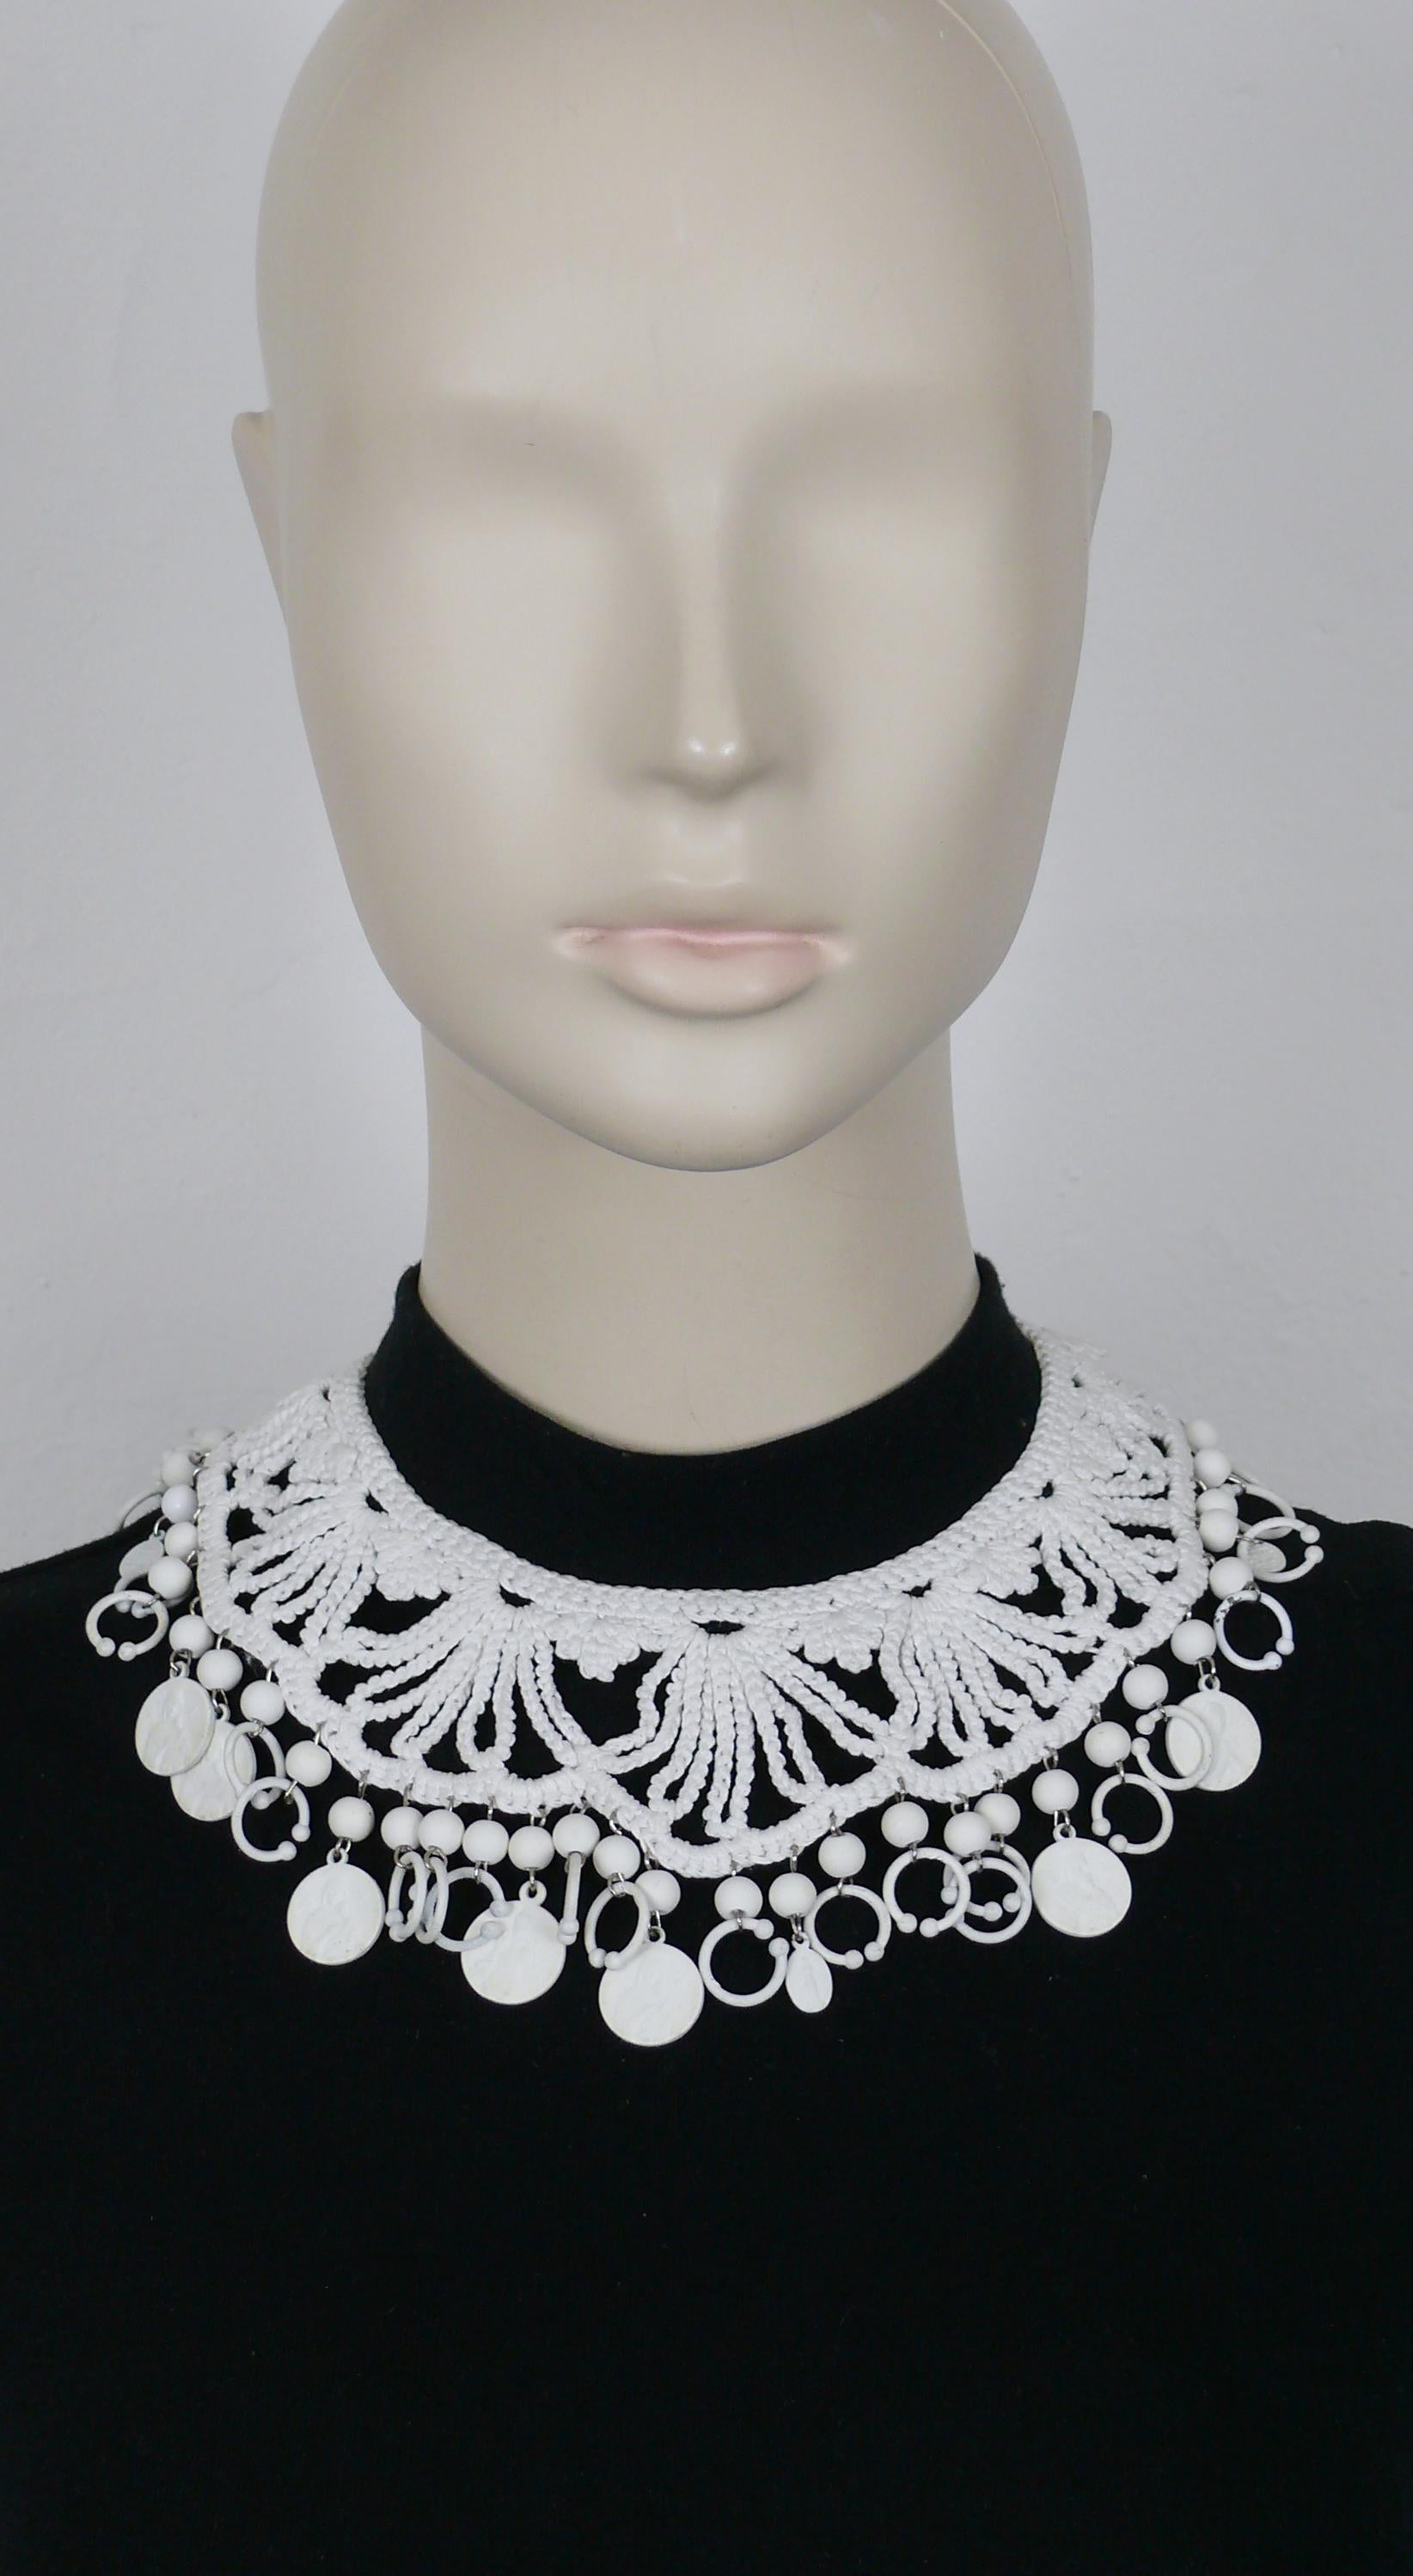 JEAN PAUL GAULTIER  white crochet collar necklace embellished with off white beads, rings and religious medals.

Double-prong fastener

Marked JEAN PAUL GAULTIER.

Indicative measurements : inner circumference approx. 36.13 cm (14.22 inches).

Comes